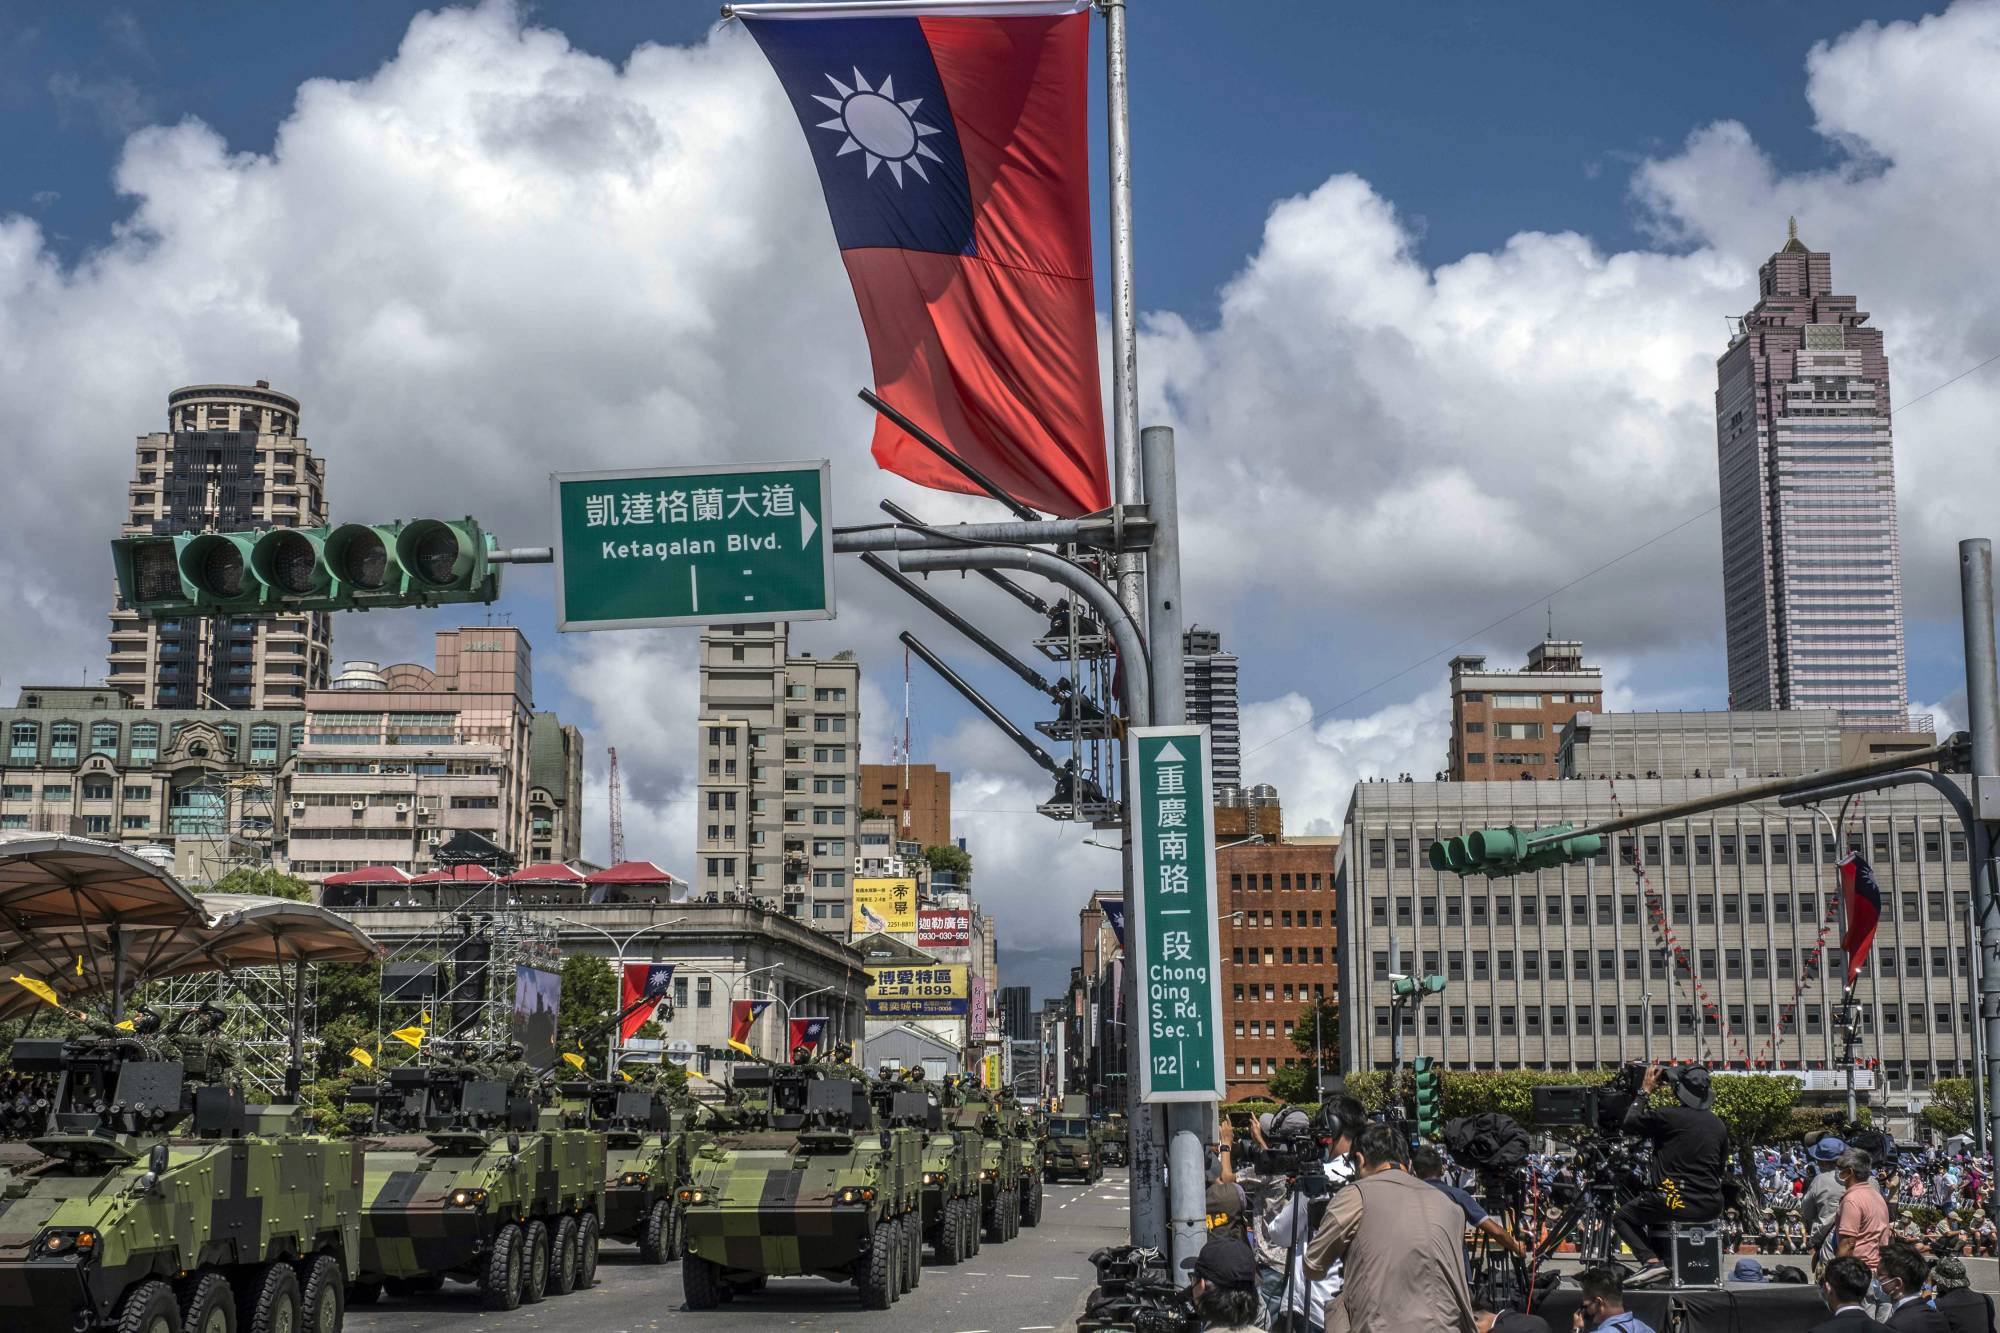 A military parade in Taipei during National Day celebrations on Oct. 10, 2021 | LAM YIK FEI / THE NEW YORK TIMES